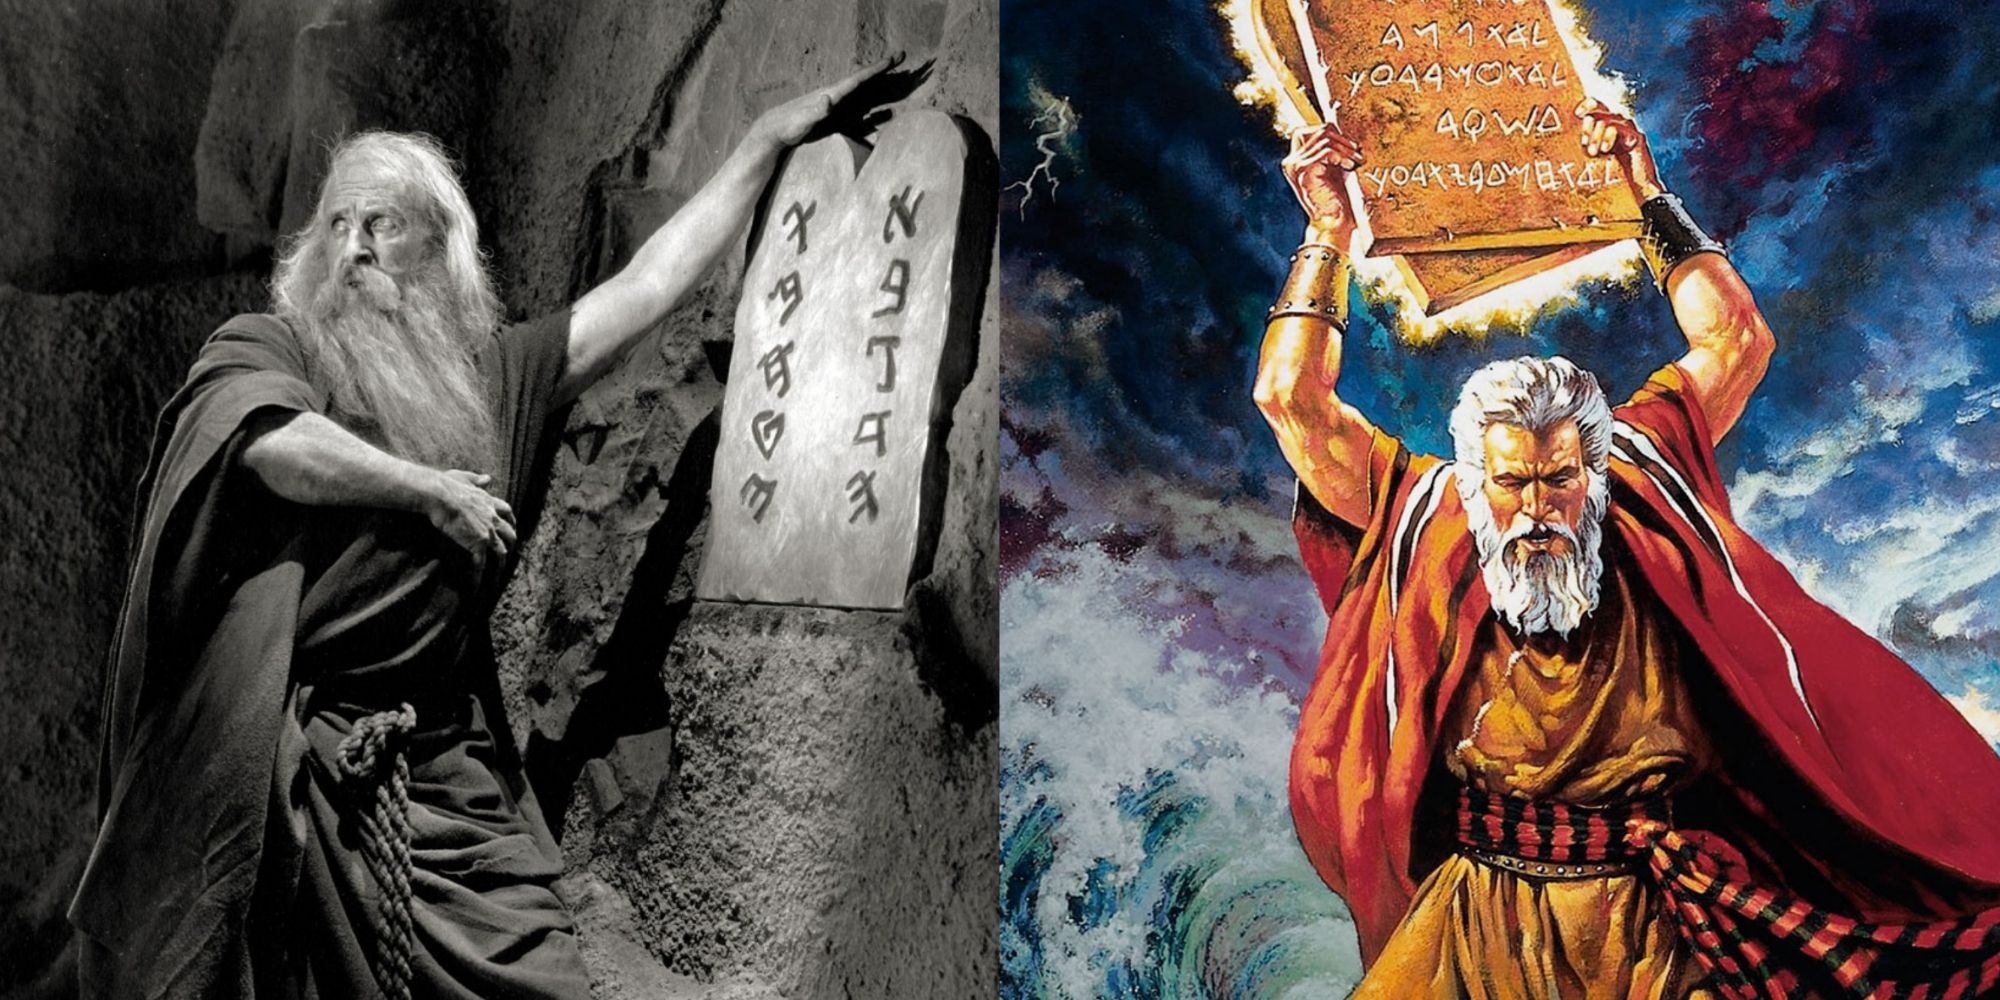 Two photos of Moses with the Commandments Tablets